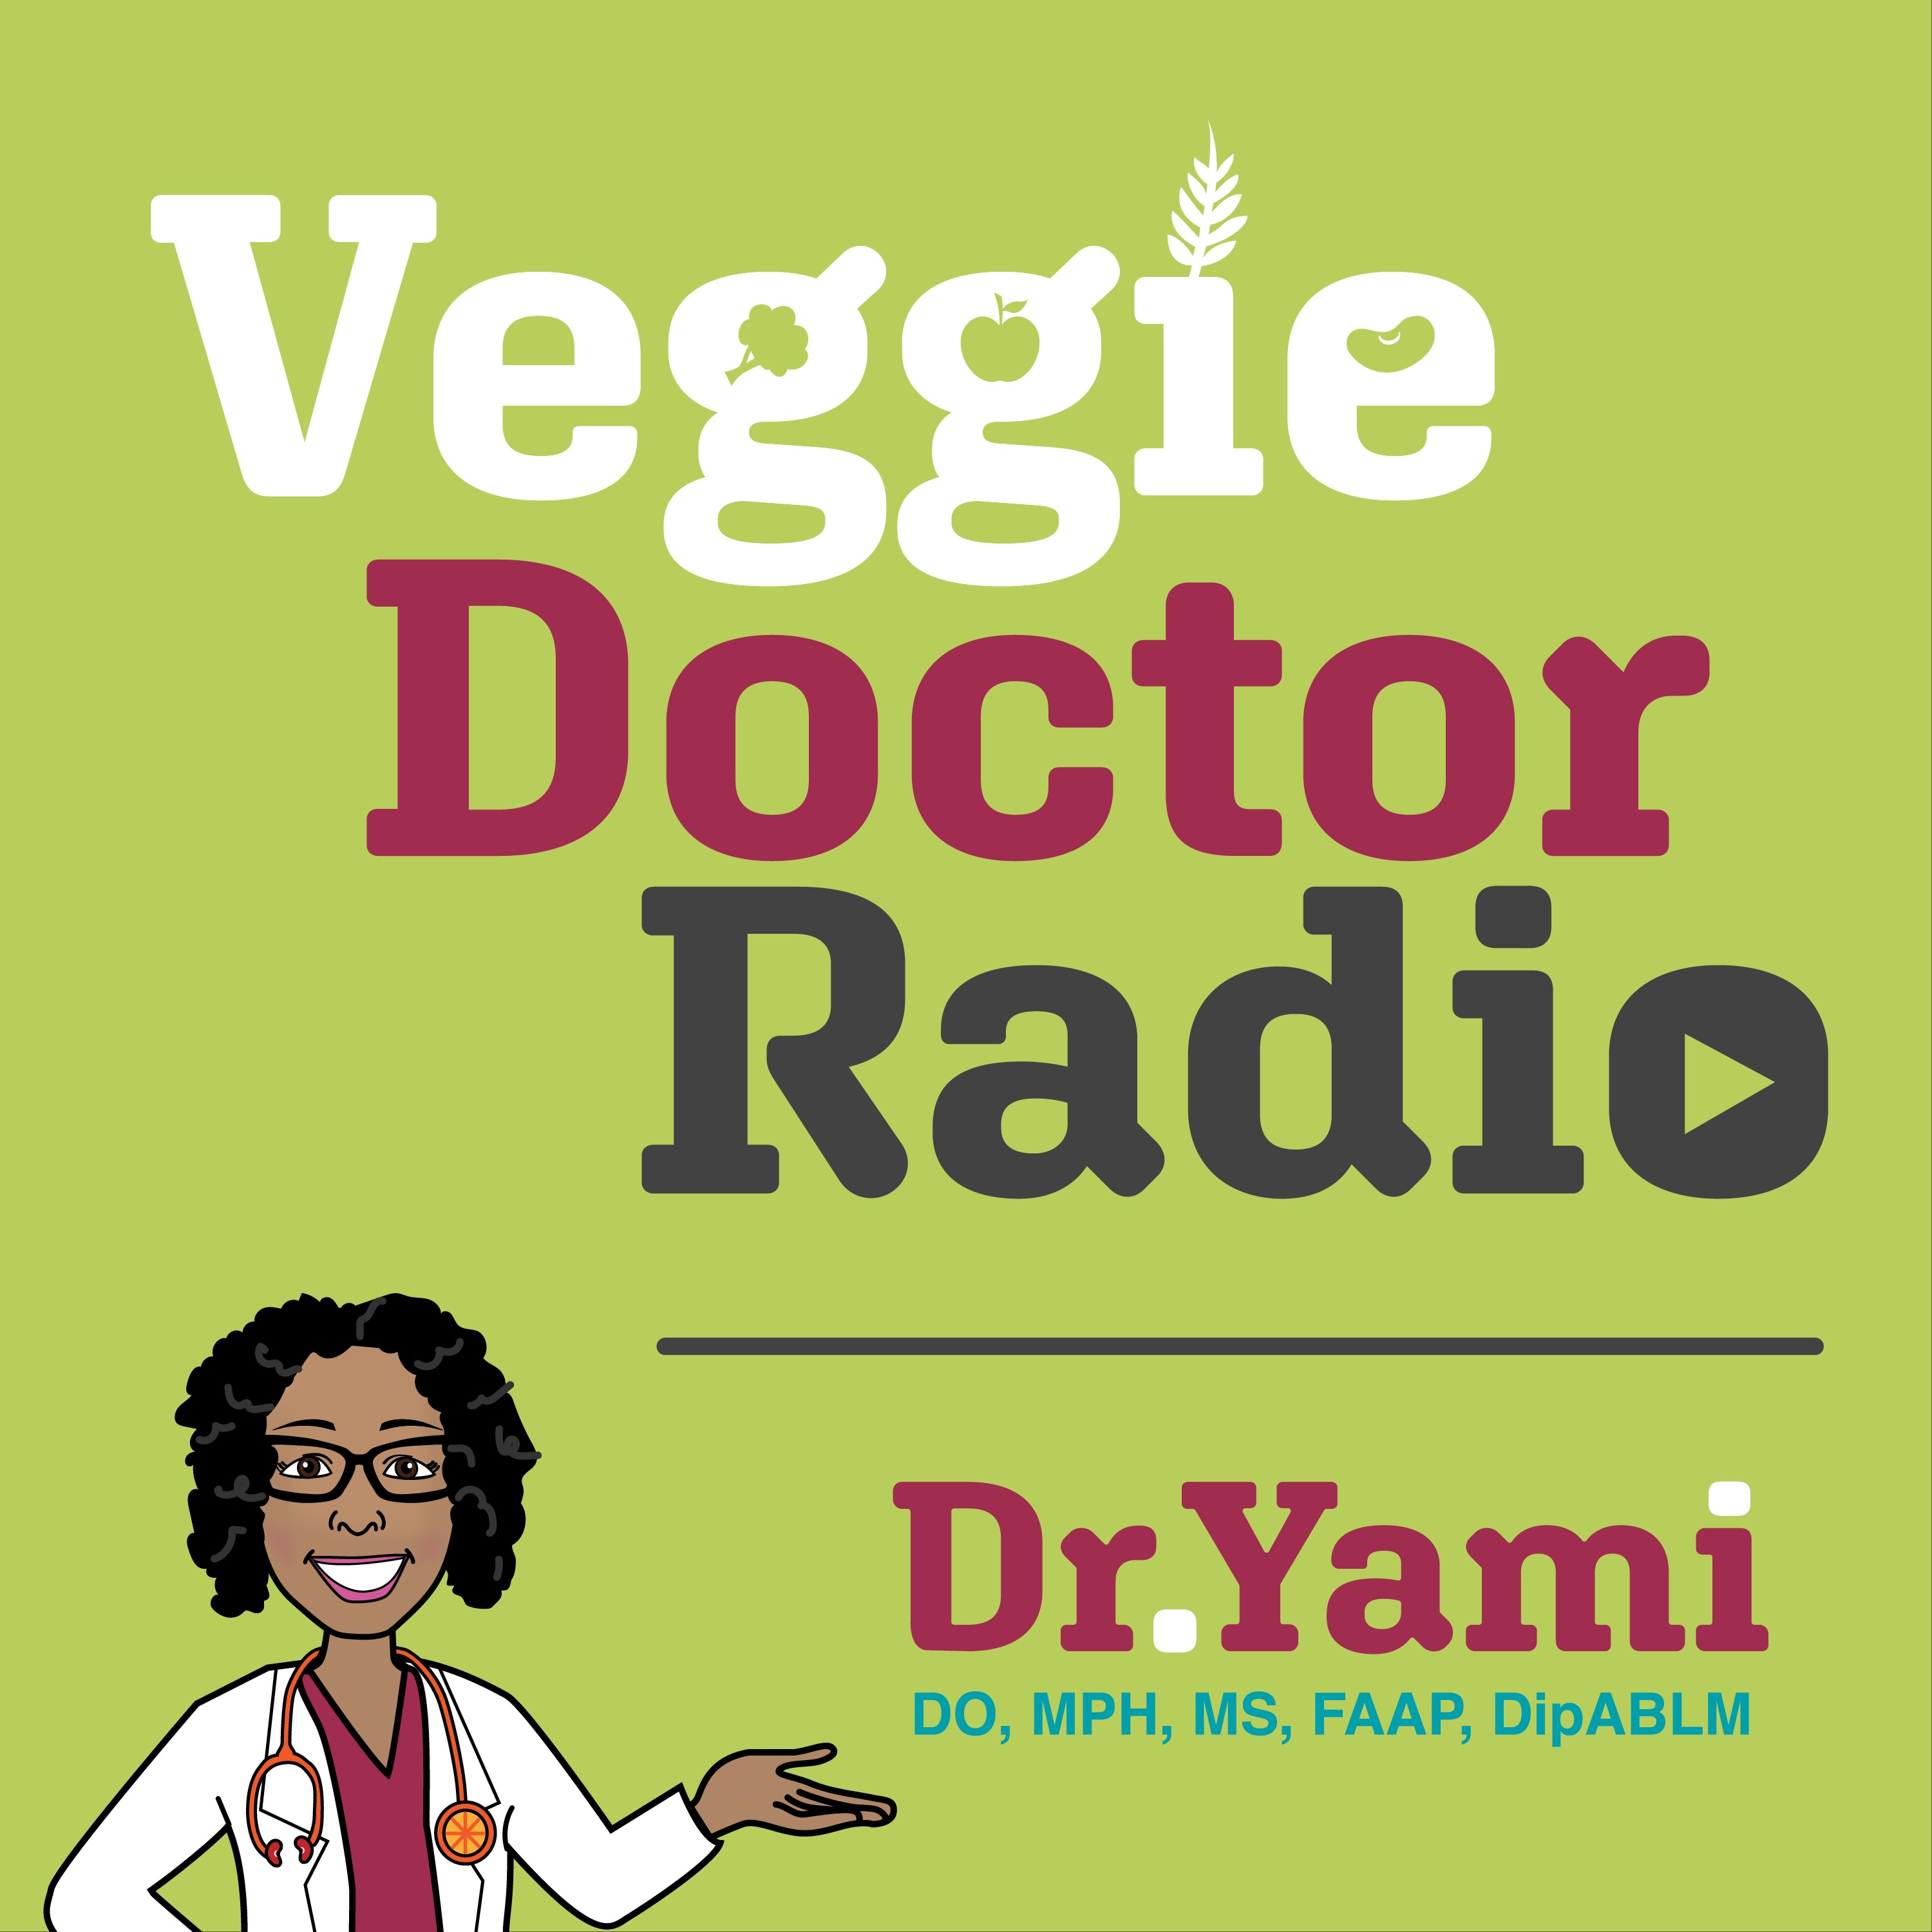 165: Spirituality and Self-fulfillment on a Plant-Based Diet with Dr. Silvia Odorcic  (Veggie Doctor Radio)